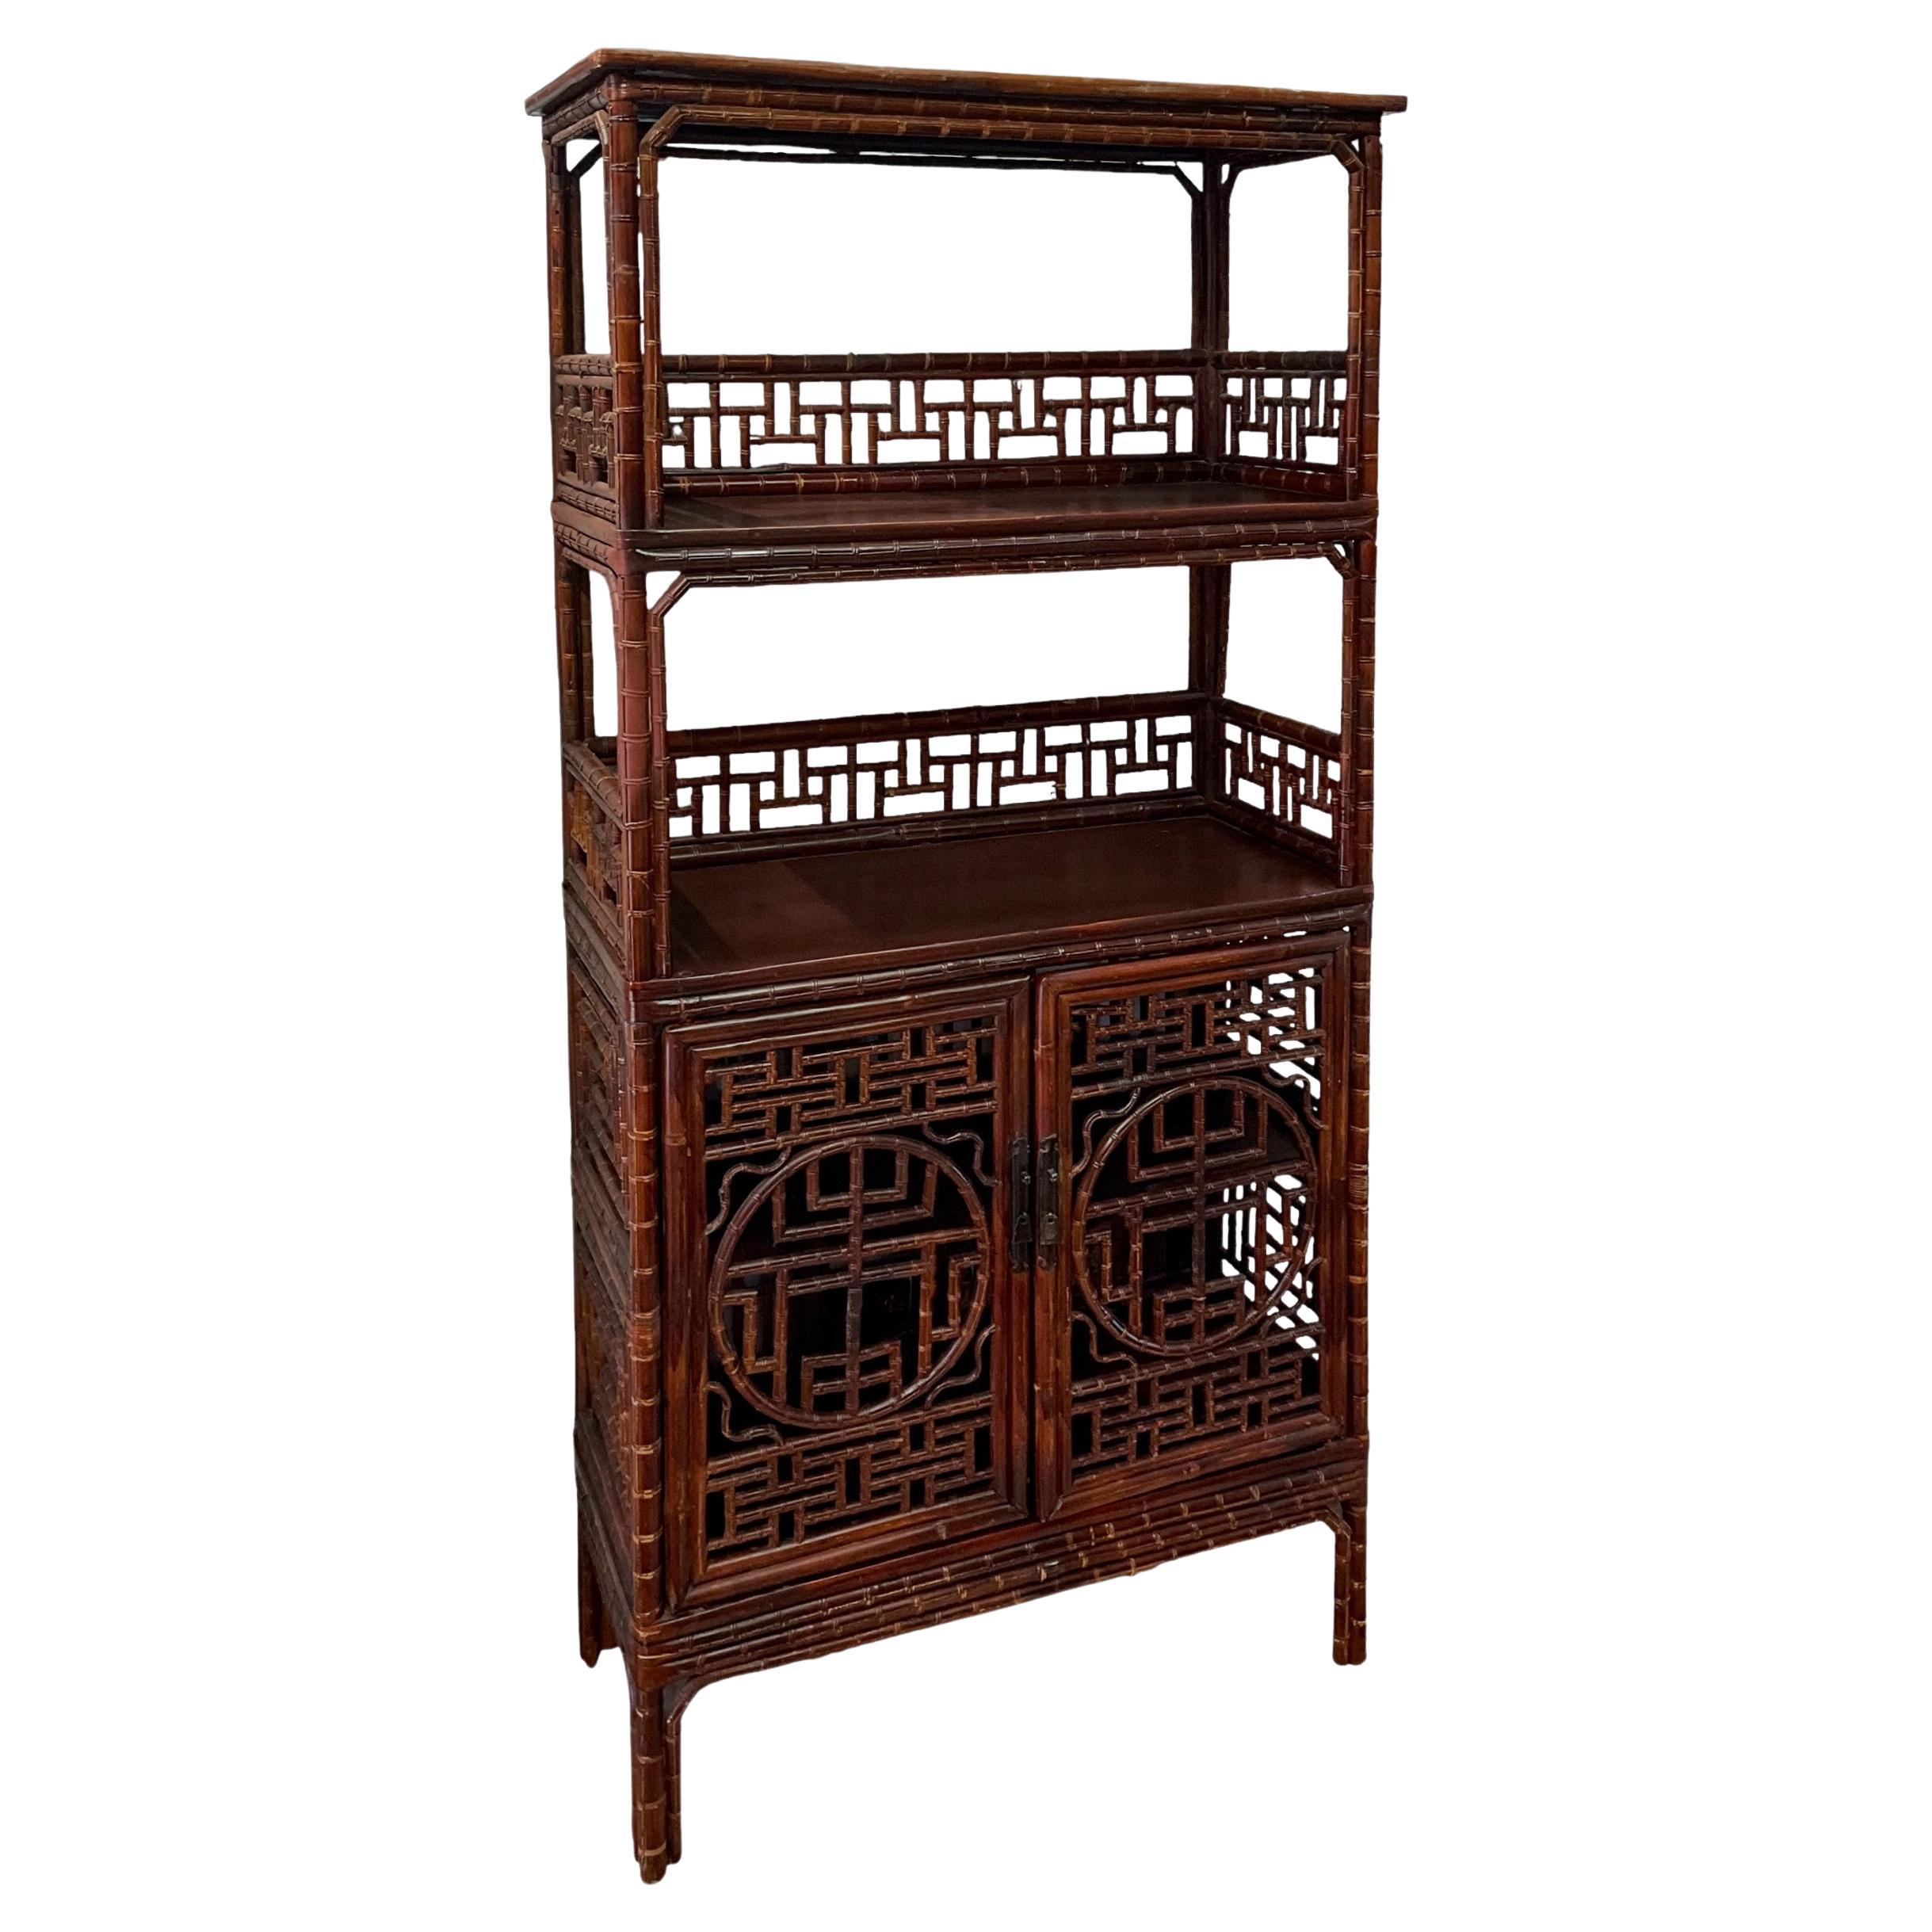 Early 20th-C. Chinese Bamboo Cabinet / Etagere / Bookcase With Ornate Fretwork  For Sale